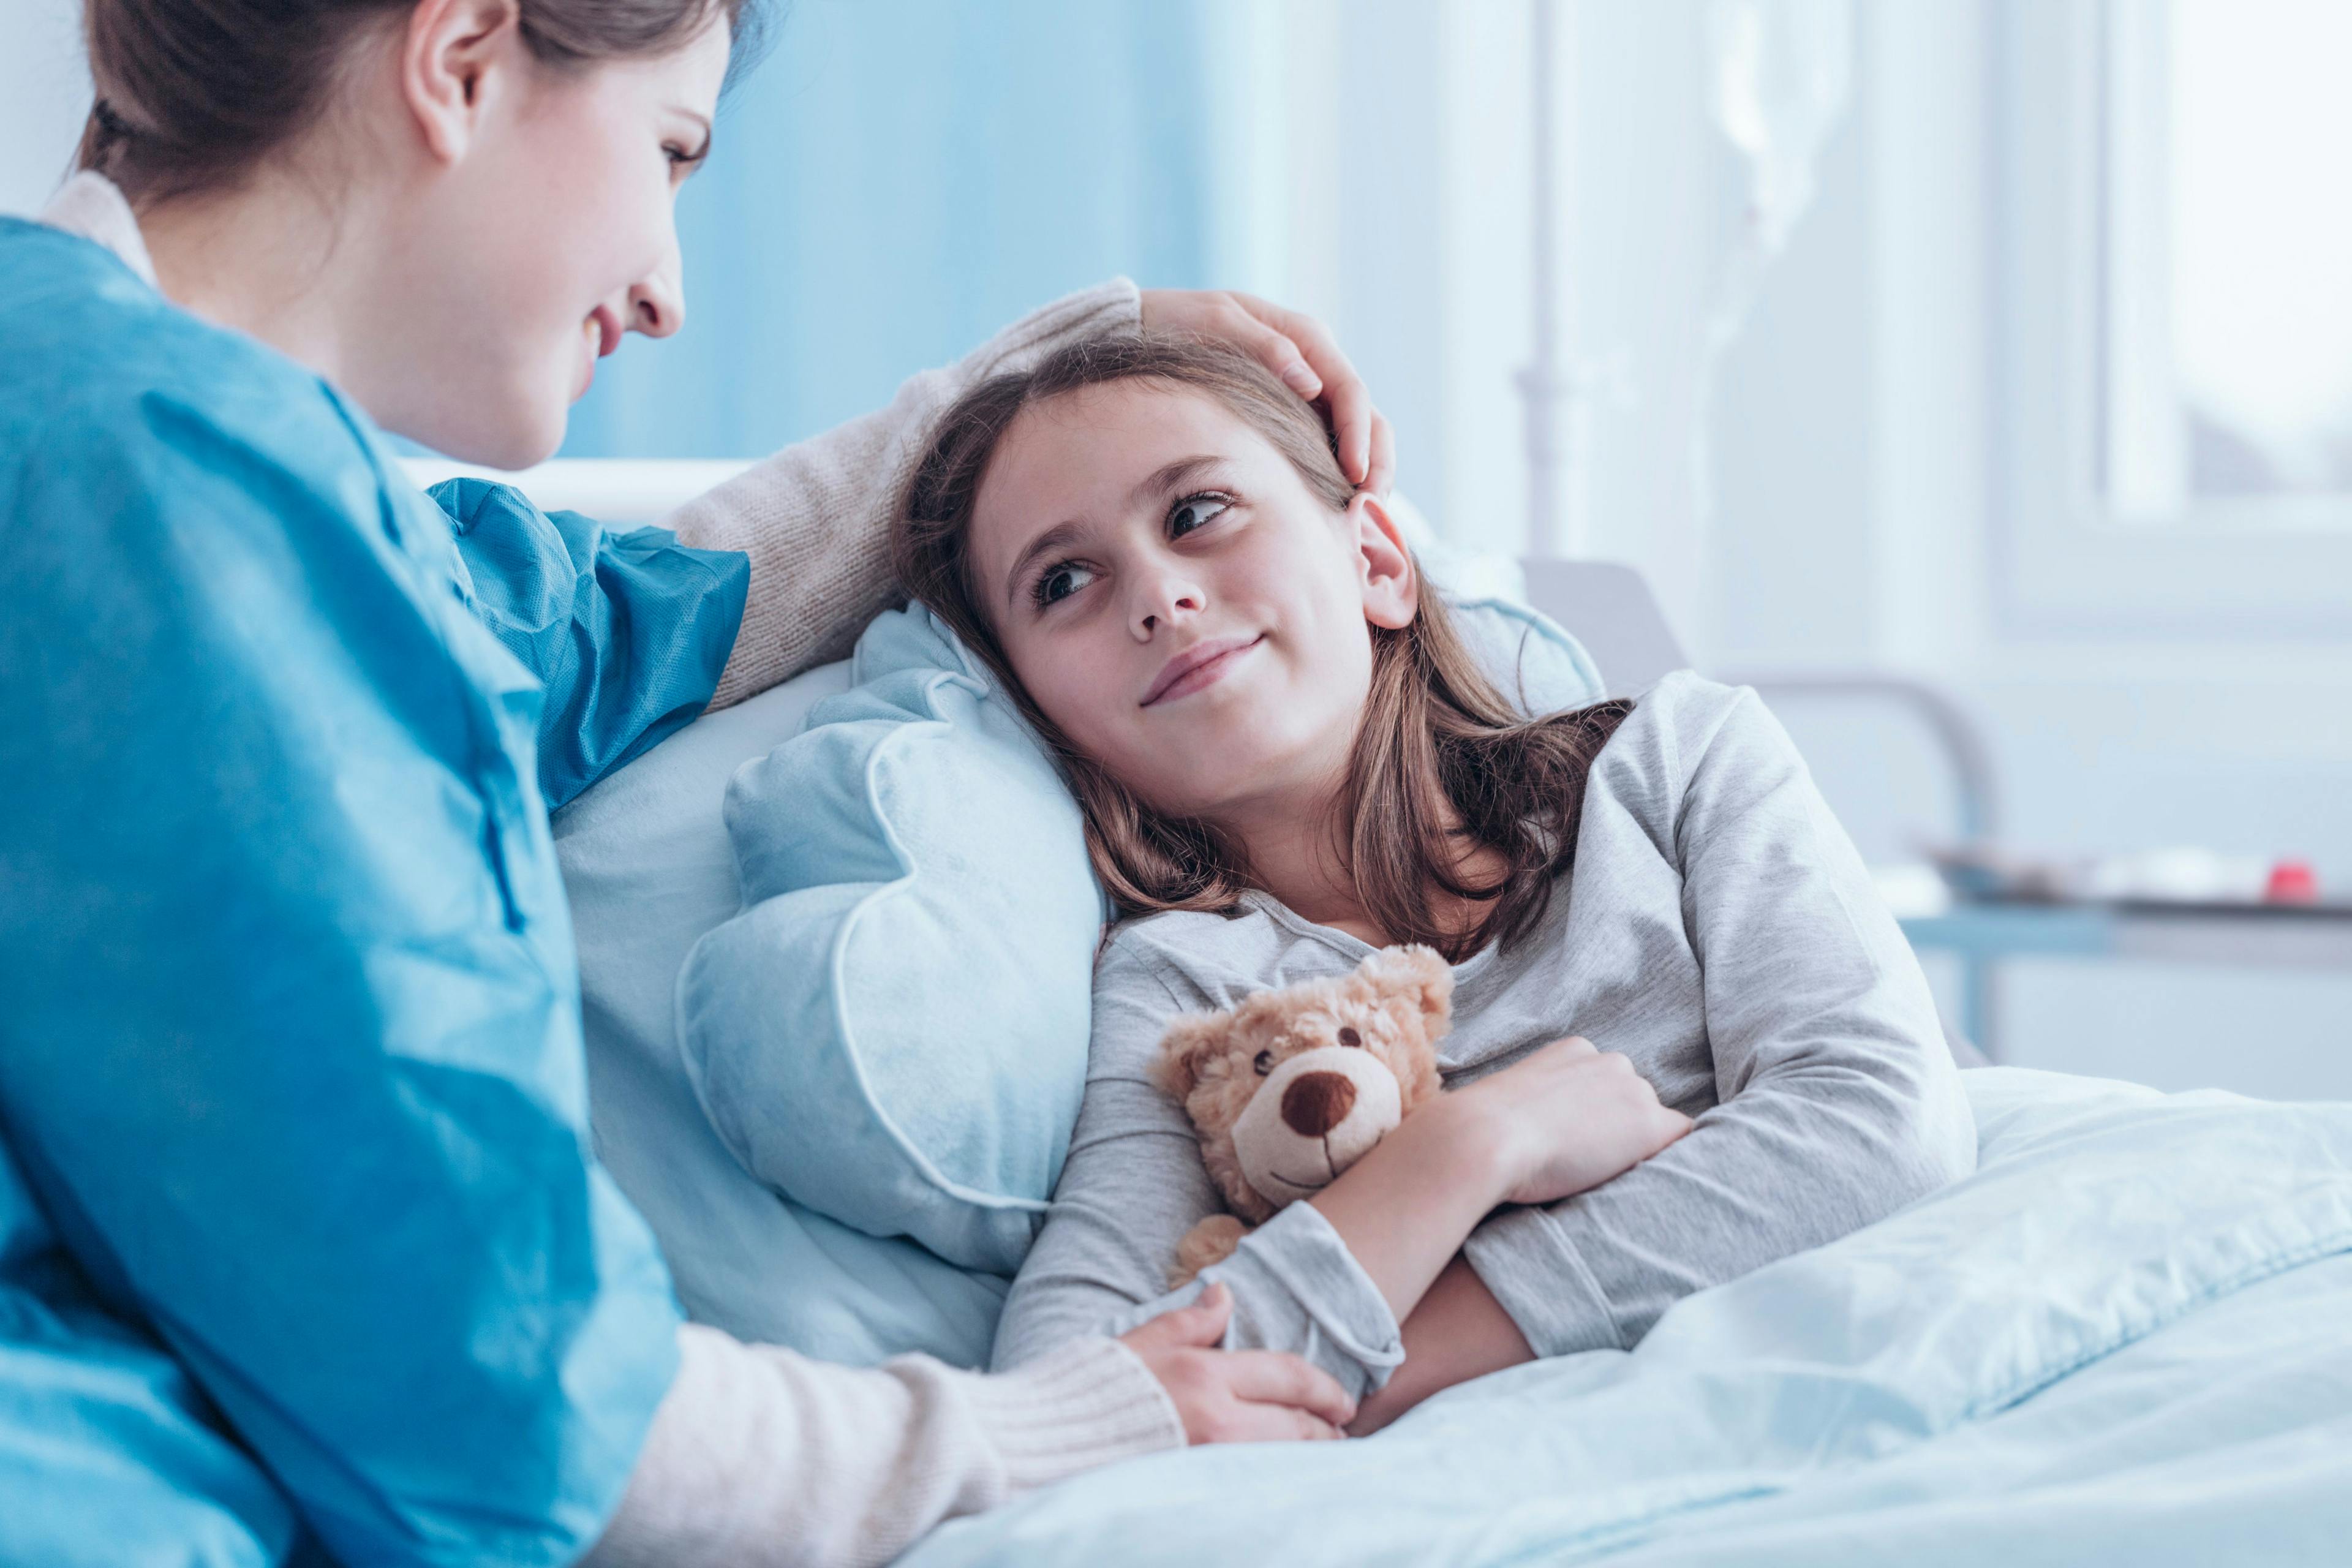 My Child Was Diagnosed With an MPN: Now What?